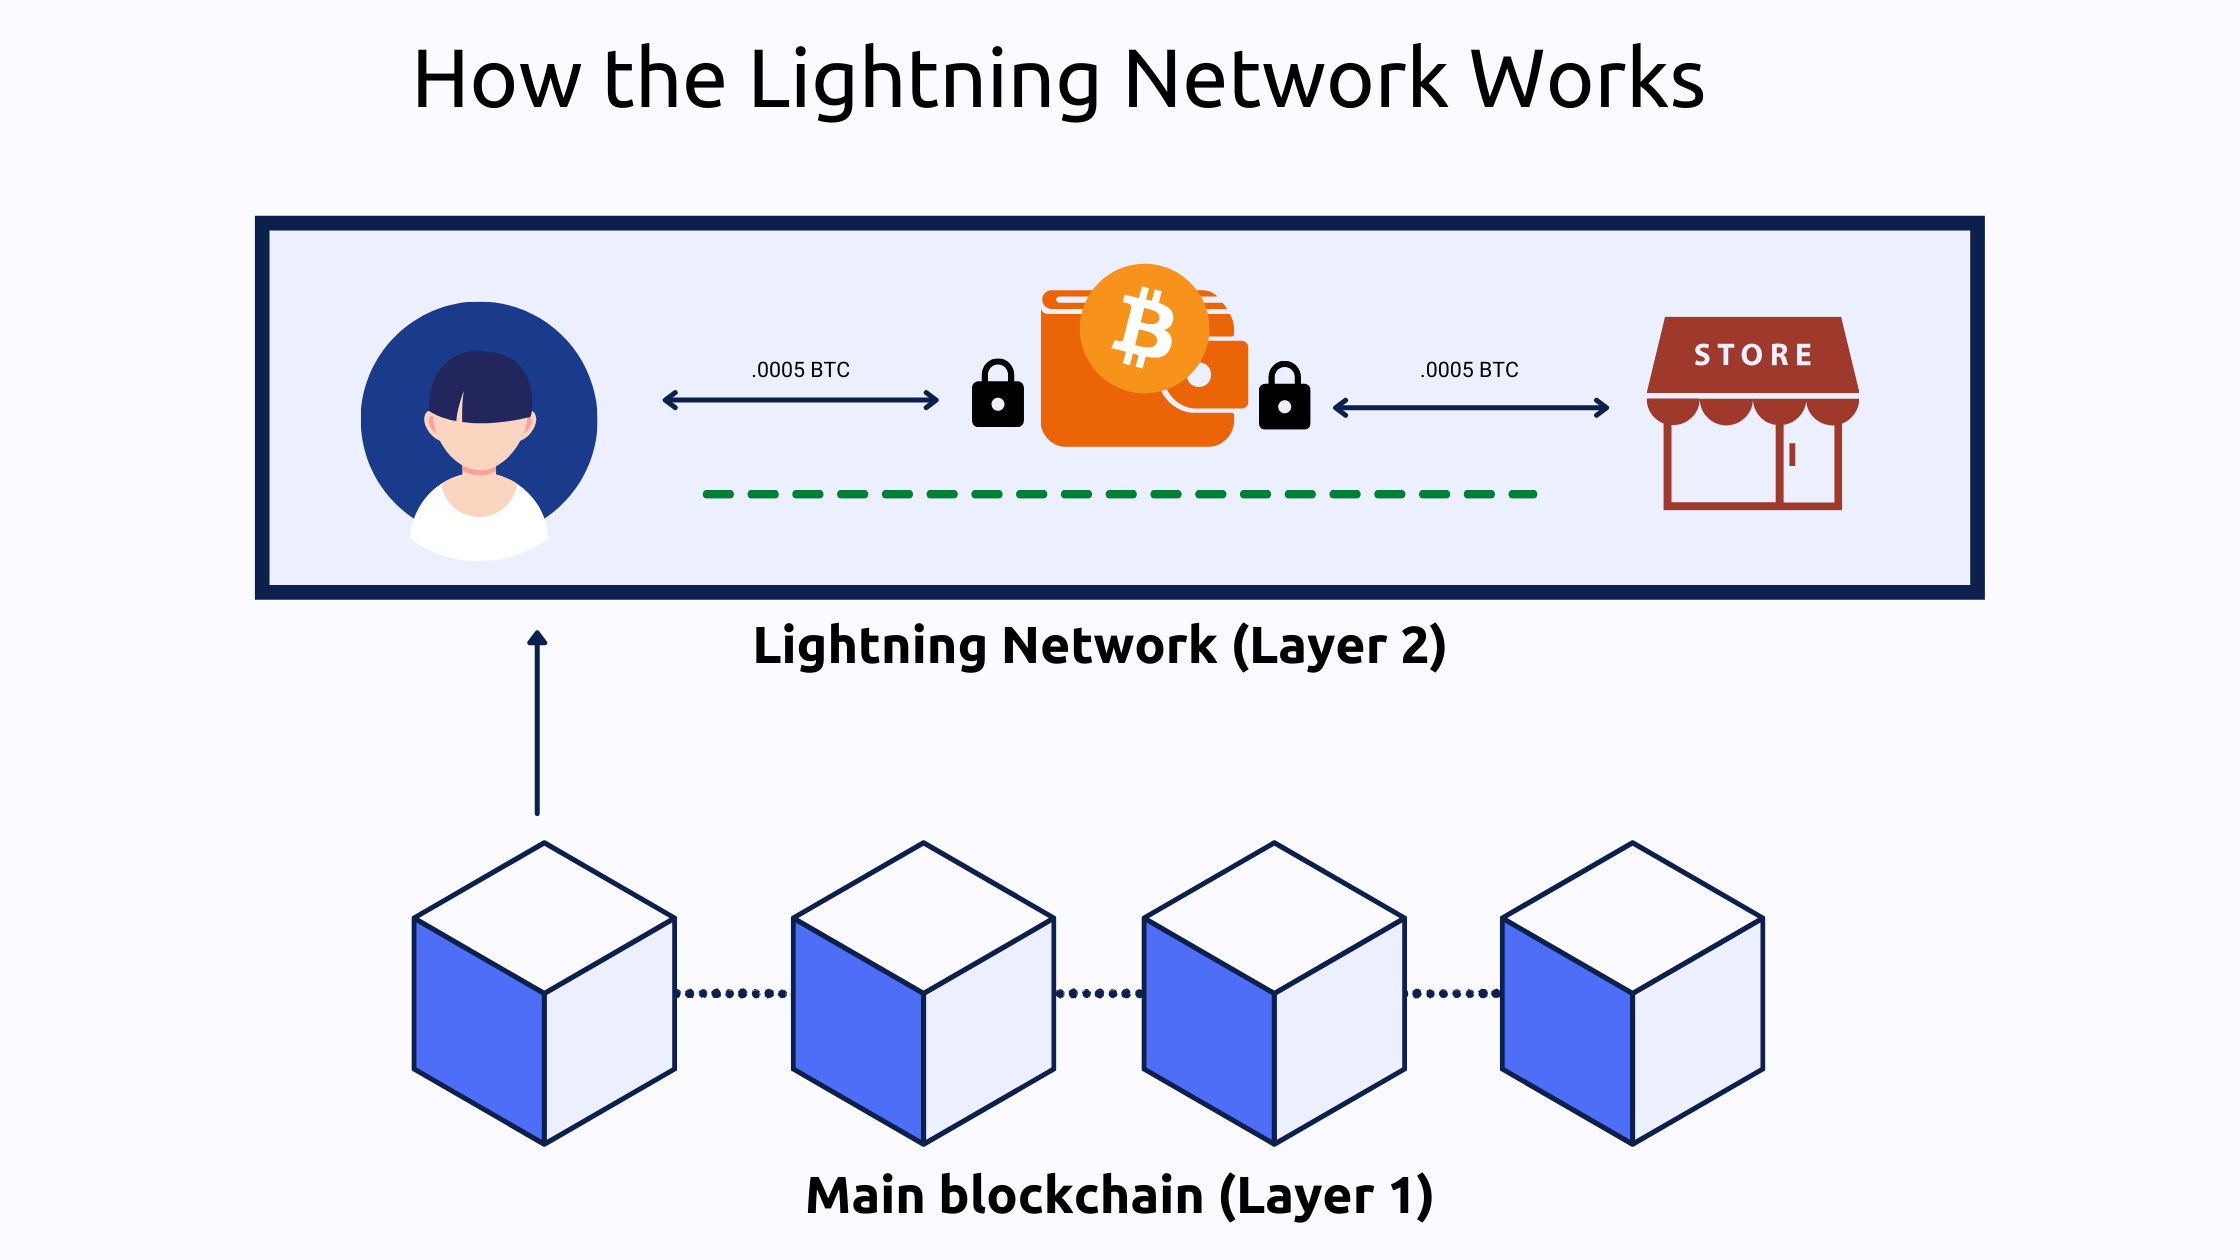 the lightning network works by creating off chain payment channels